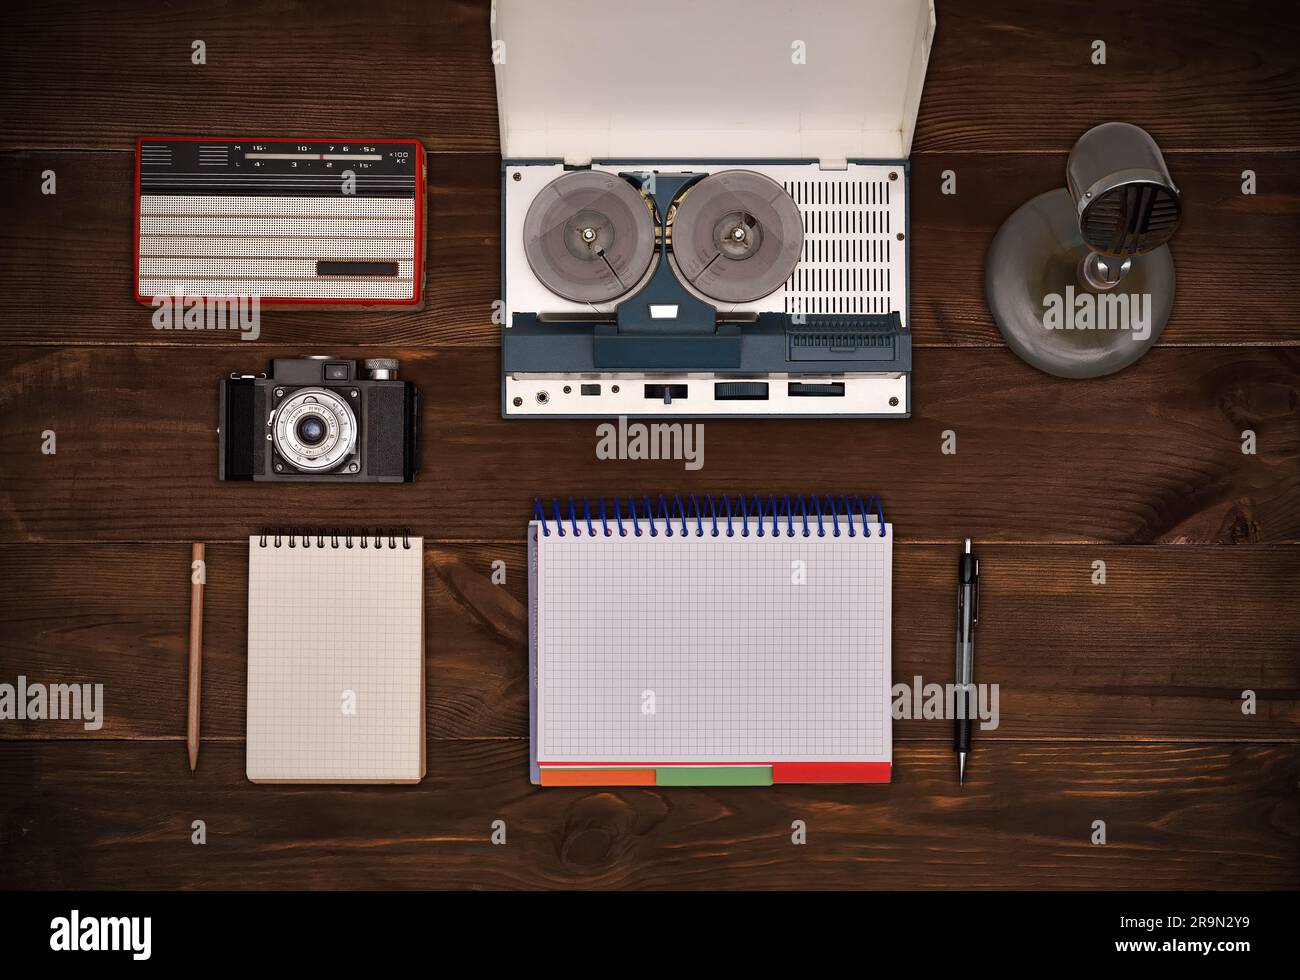 Old retro reel tape recorder, vintage radio, retro camera on wooden table. Blank notepad and pen. Stock Photo